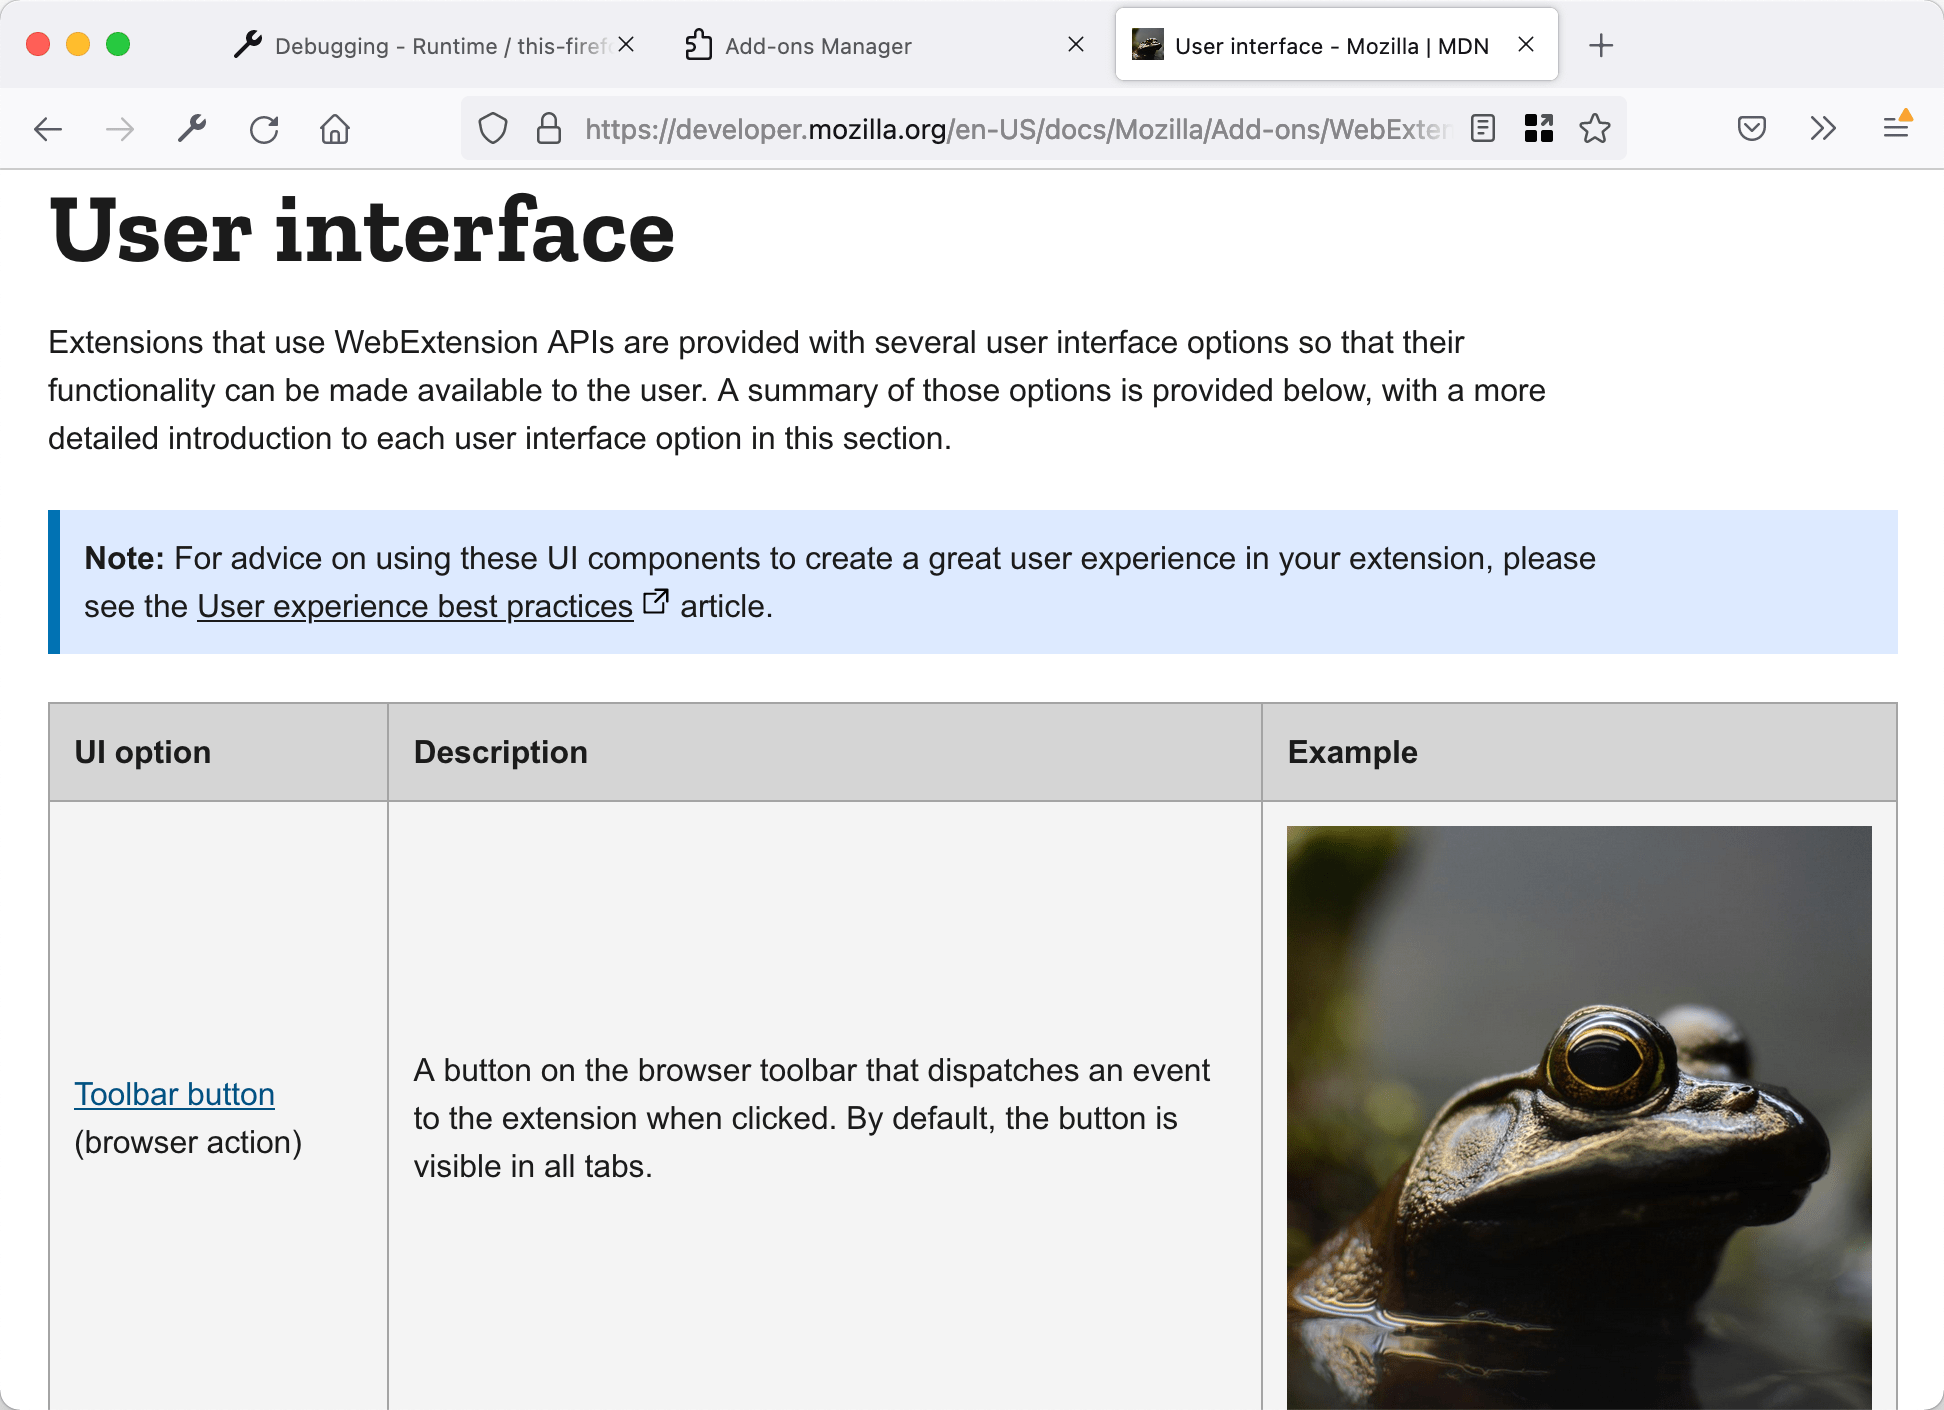 Images on a page replaced with a frog image